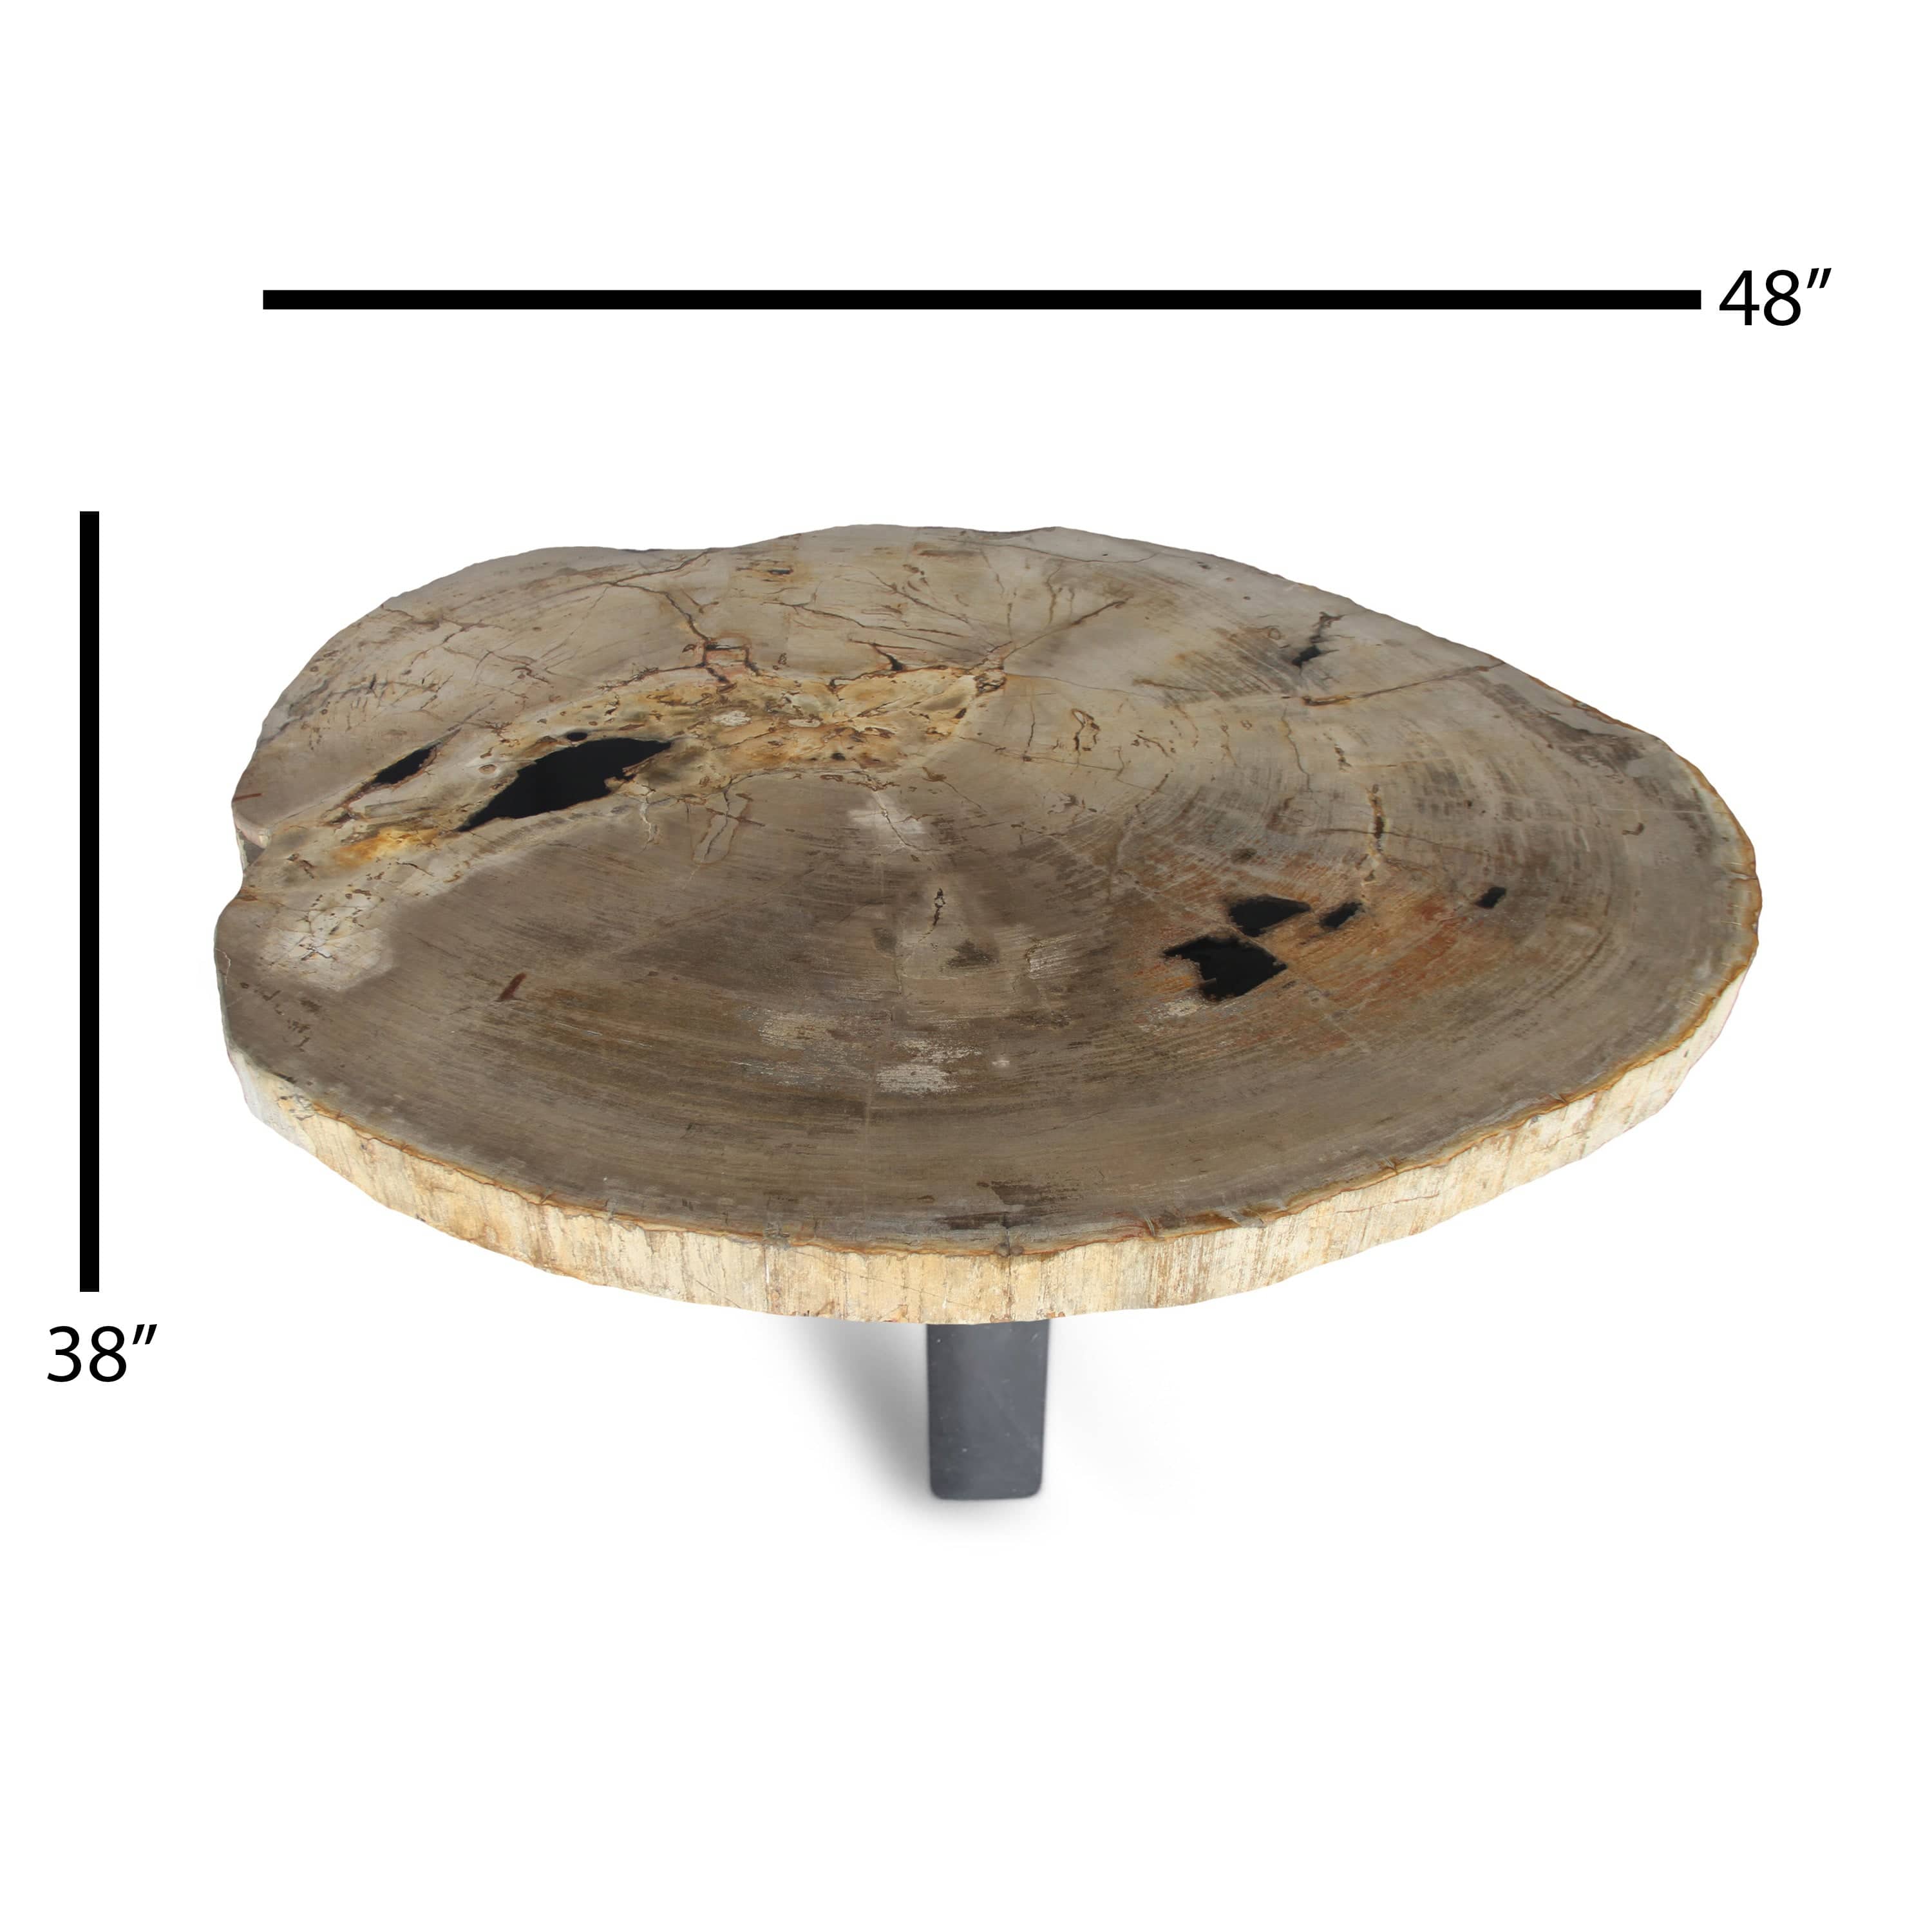 Kalifano Petrified Wood Petrified Wood Round Slab Coffee Table from Indonesia - 48" / 277 lbs PWT10200.003